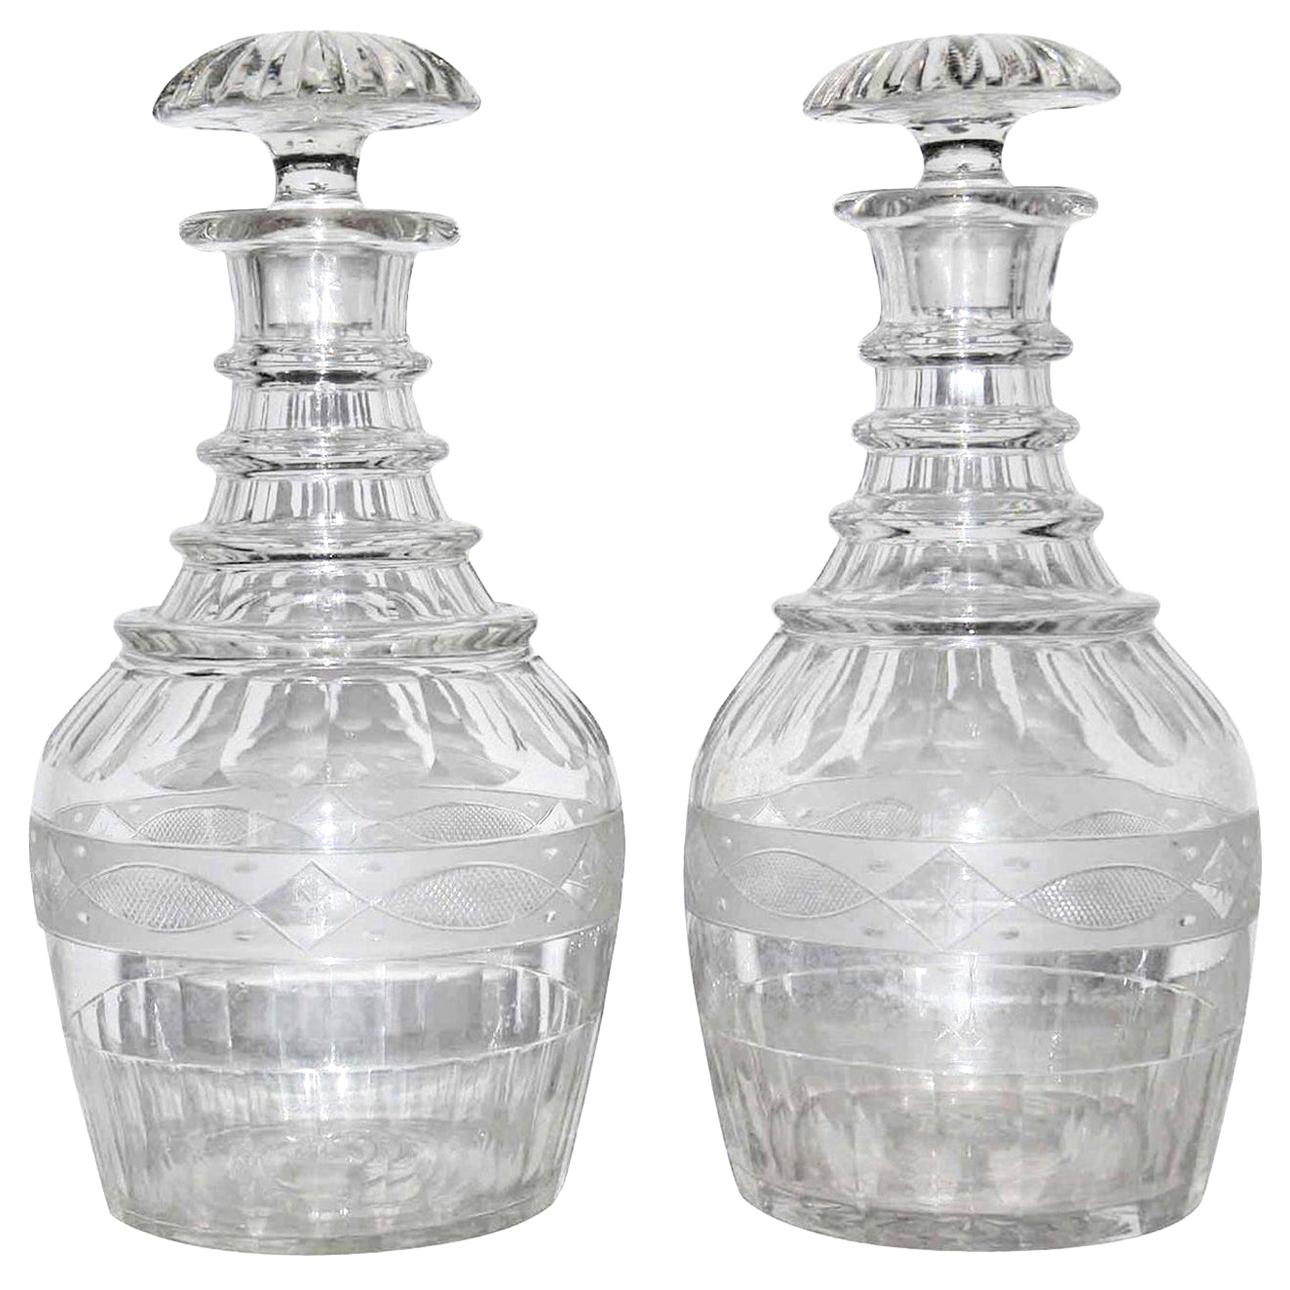 Pair of Antique Cut Crystal Georgian Style Decanters